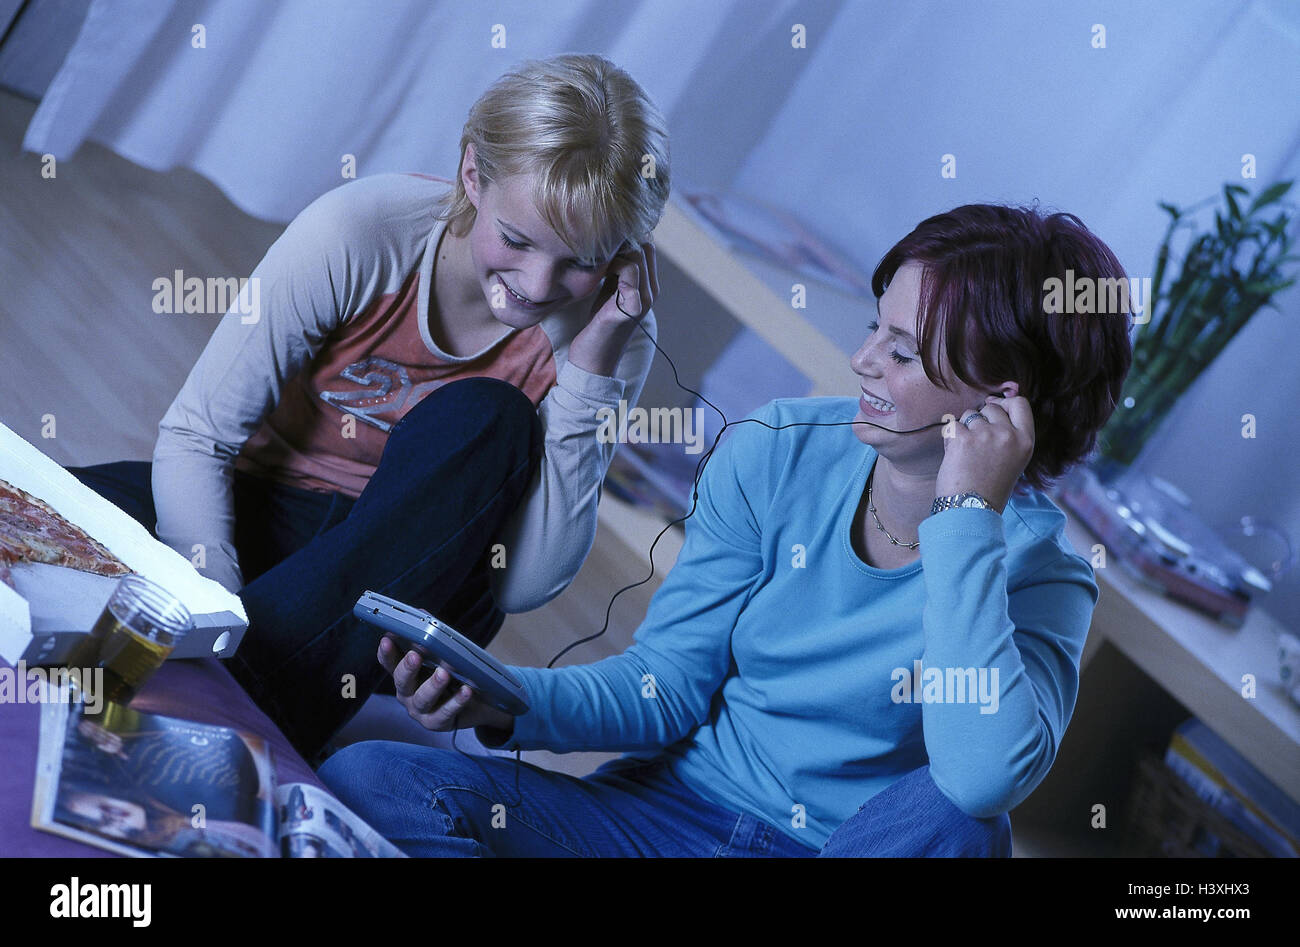 Sitting rooms, girls, floor, sit, hear Discman, music, model released, friends, teenagers, young persons, two, leisure time, leisure activity, CDïs, CD, entertainment eat pizza, Pizzaessen, happy, smile, fun, interest, magazine Stock Photo